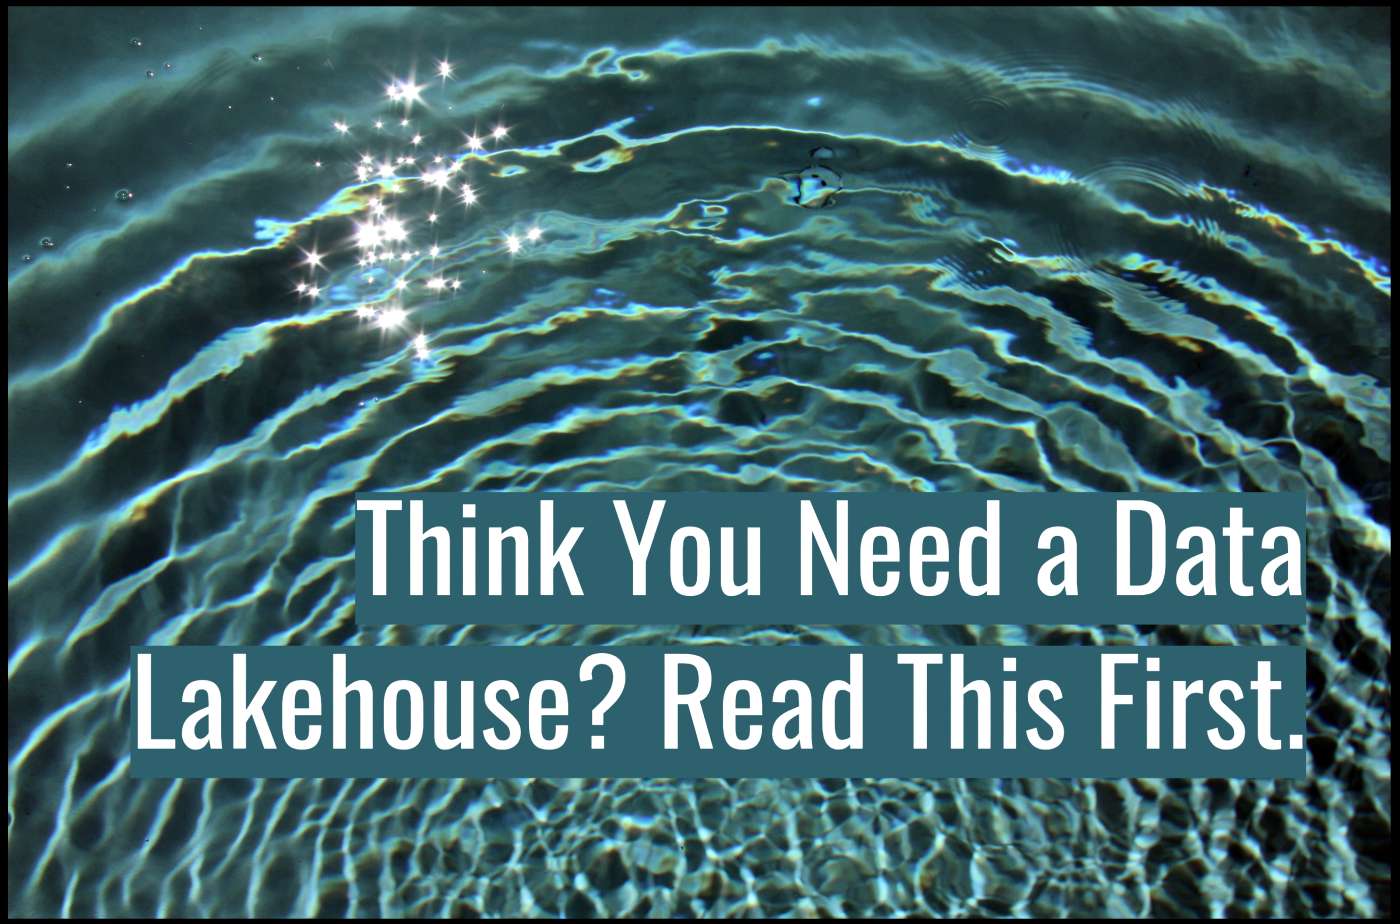 Think You Need a Data Lakehouse?